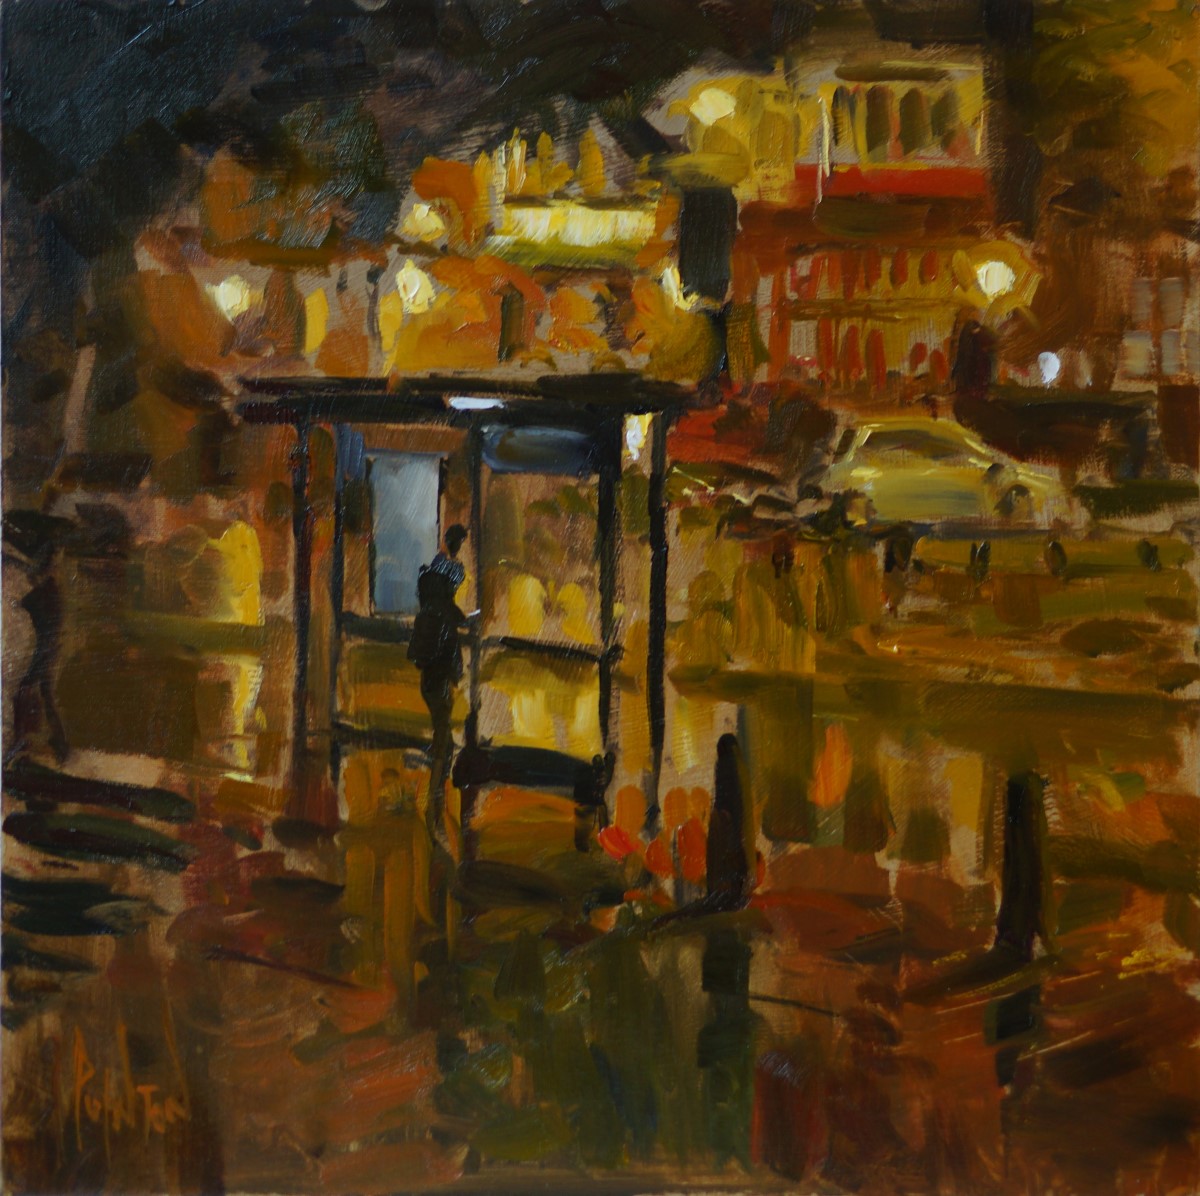 Rob Pointon, 'Waiting for the Night Bus', Tombland, Oil, 40x40cm, <a href="http://www.paintout.org/artists/rob-pointon#buy">FOR SALE</a>, £650